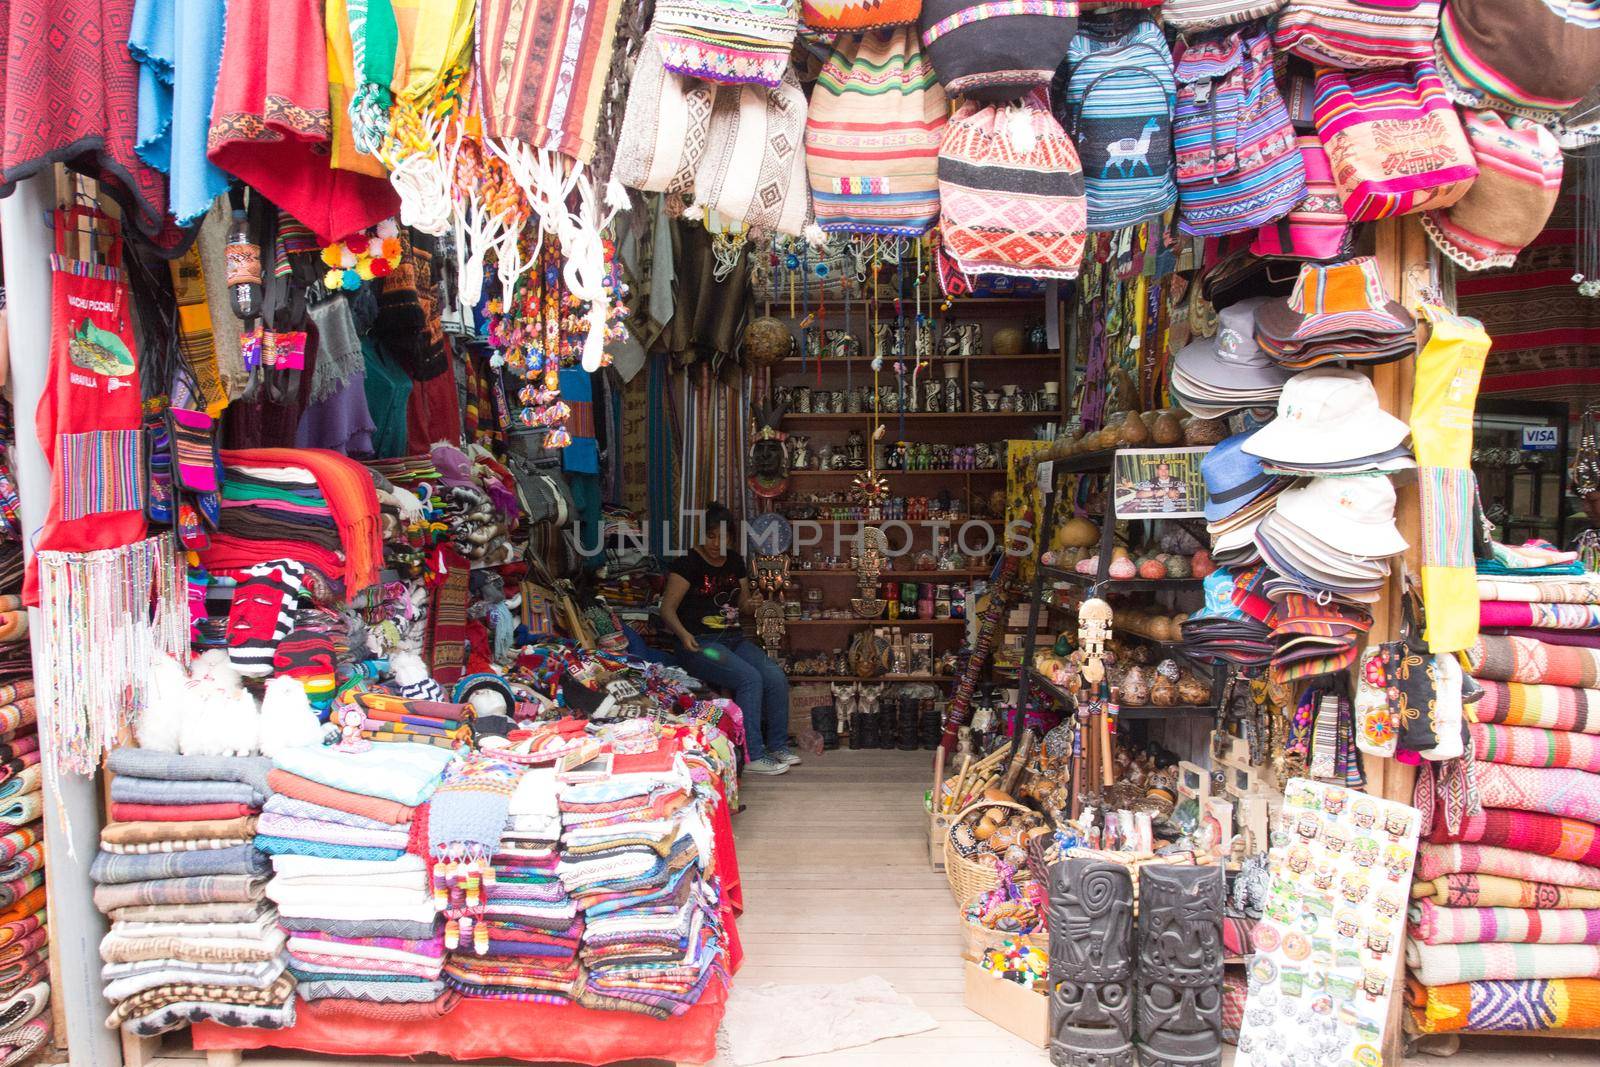 Cusco, Peru - October 7, 2015: A stall at an artisan market in the historic city centre